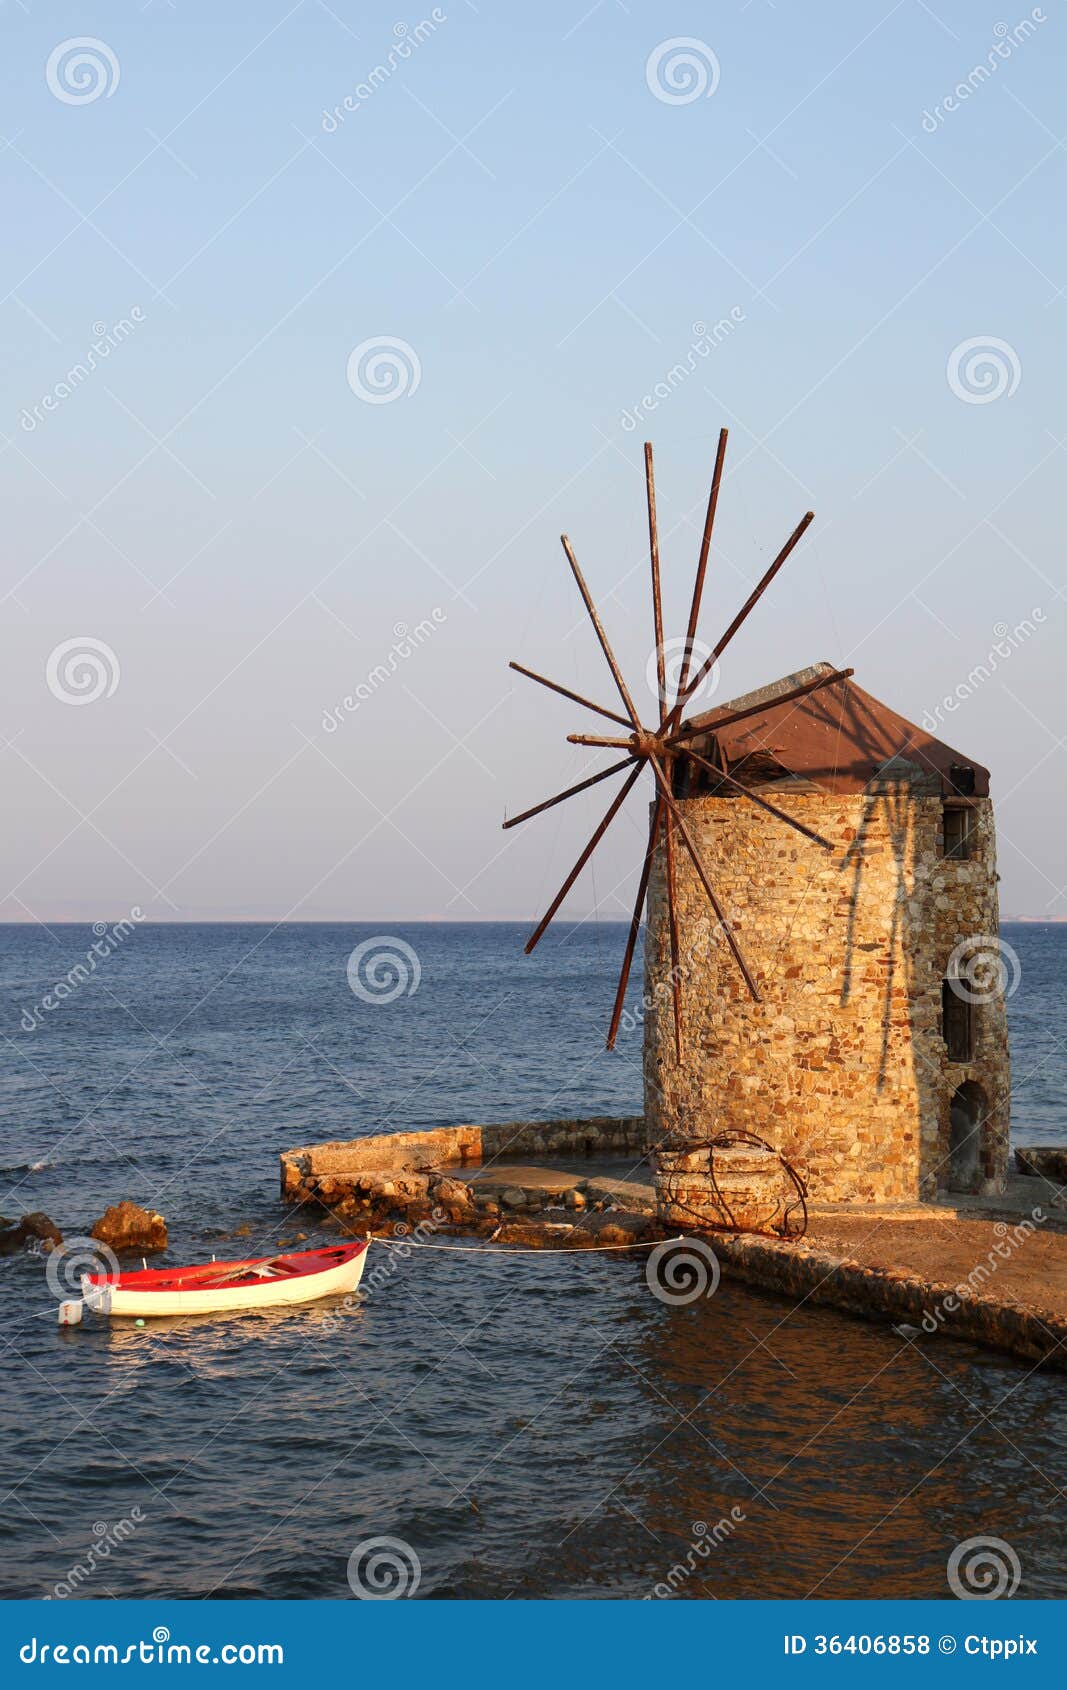 Old Greek Windmill And Wooden Boat Royalty Free Stock Photos - Image ...